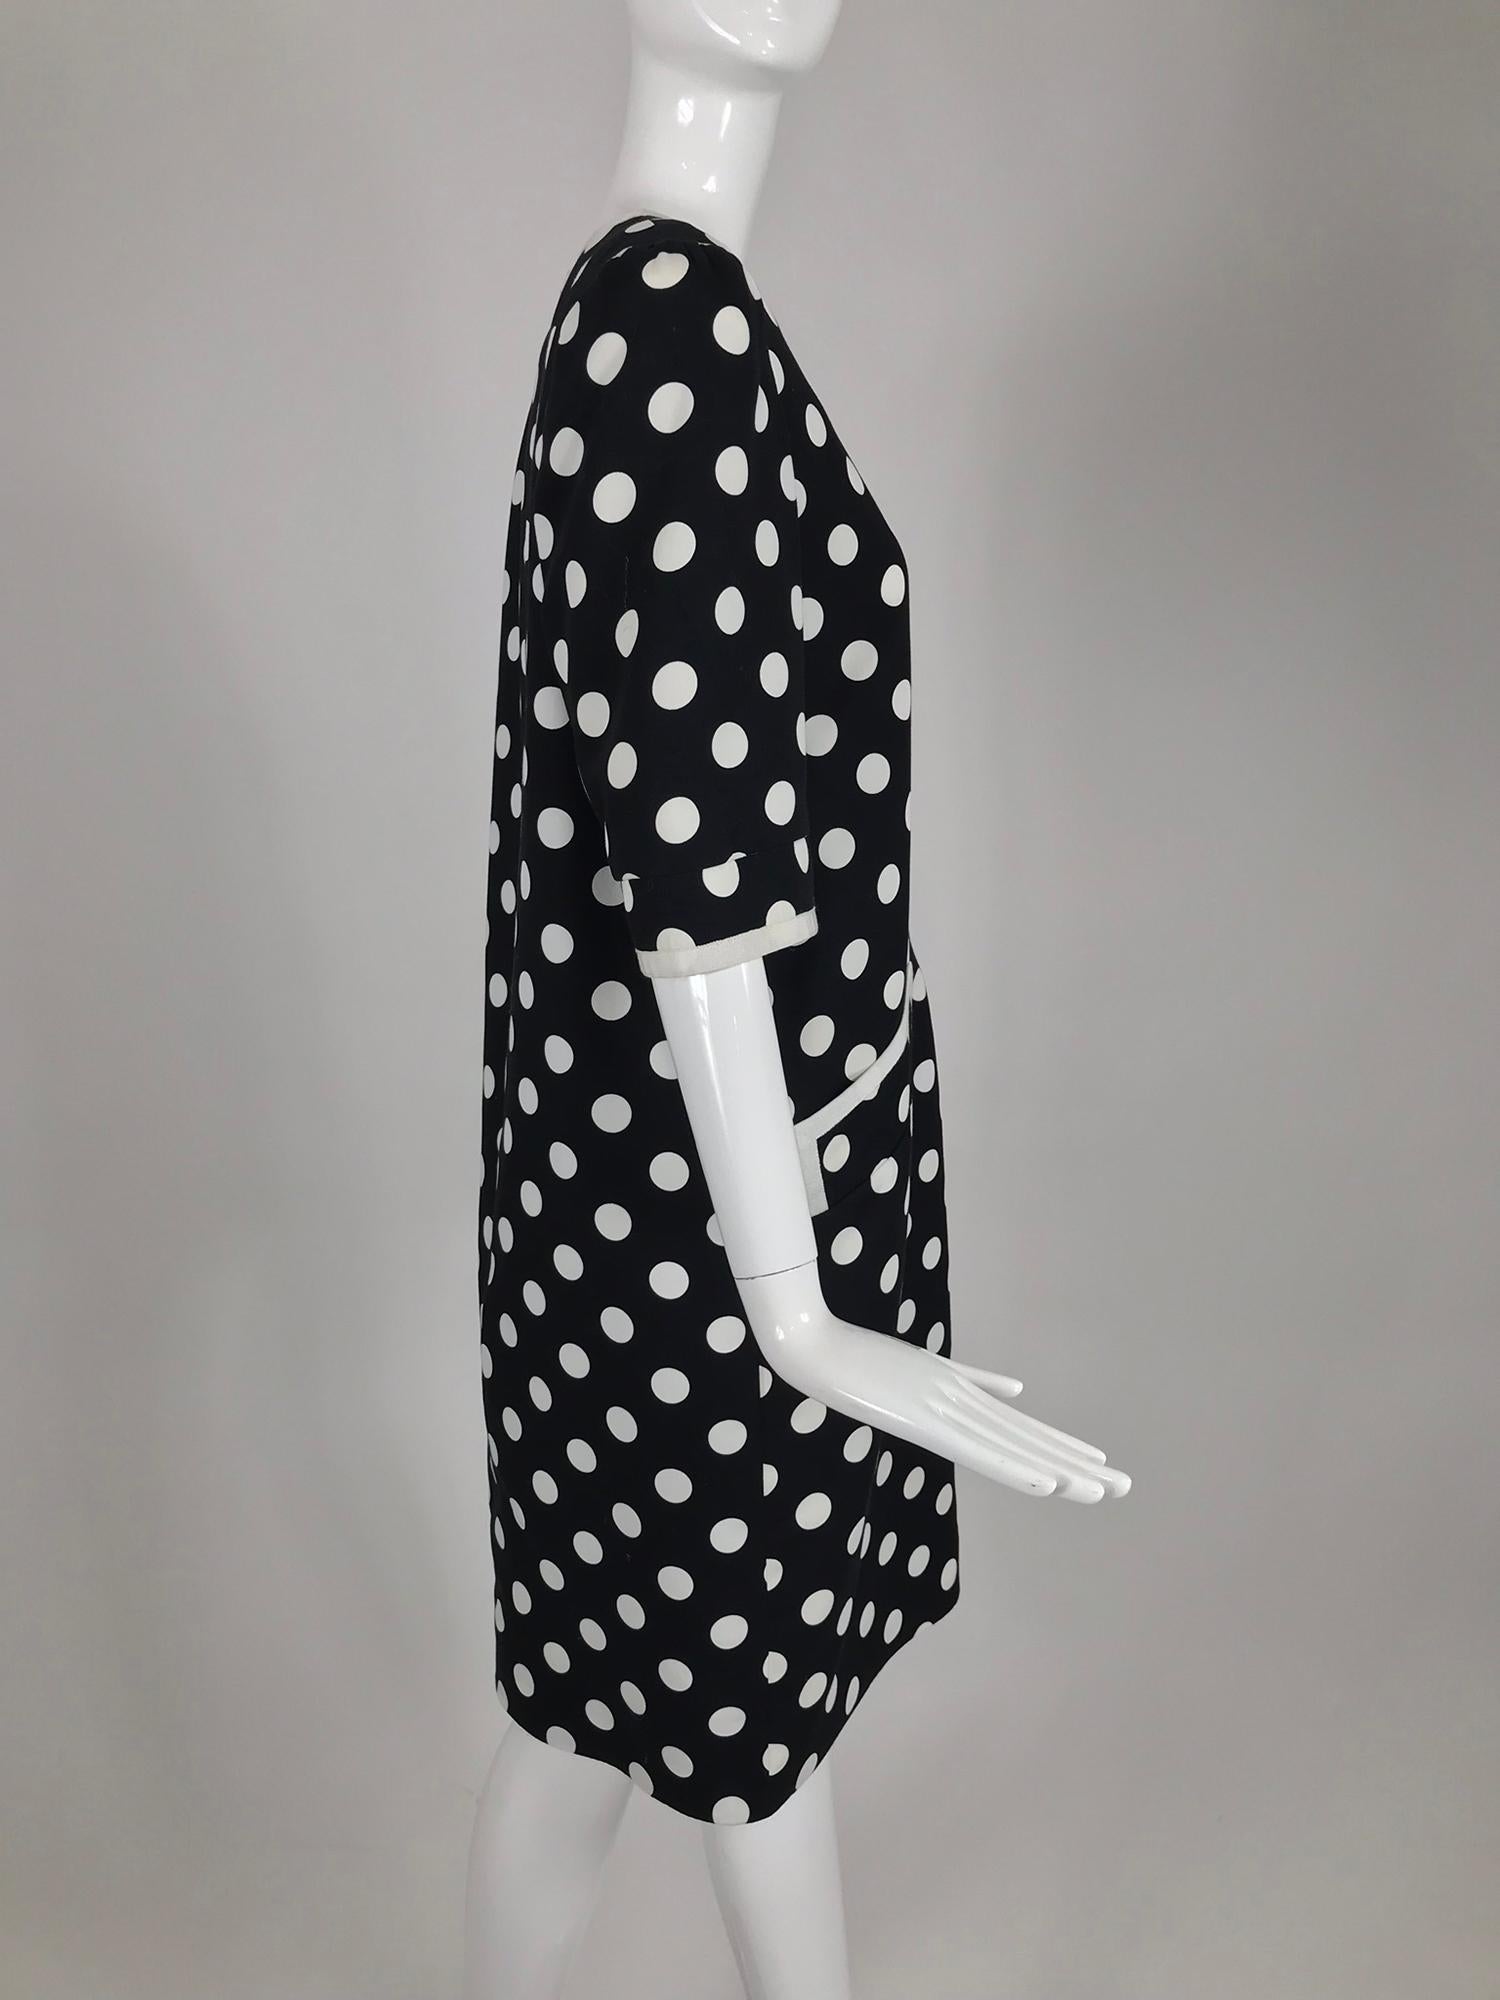 Givenchy Couture Black and White Cotton Polka Dot Day Dress 1980s For Sale 1